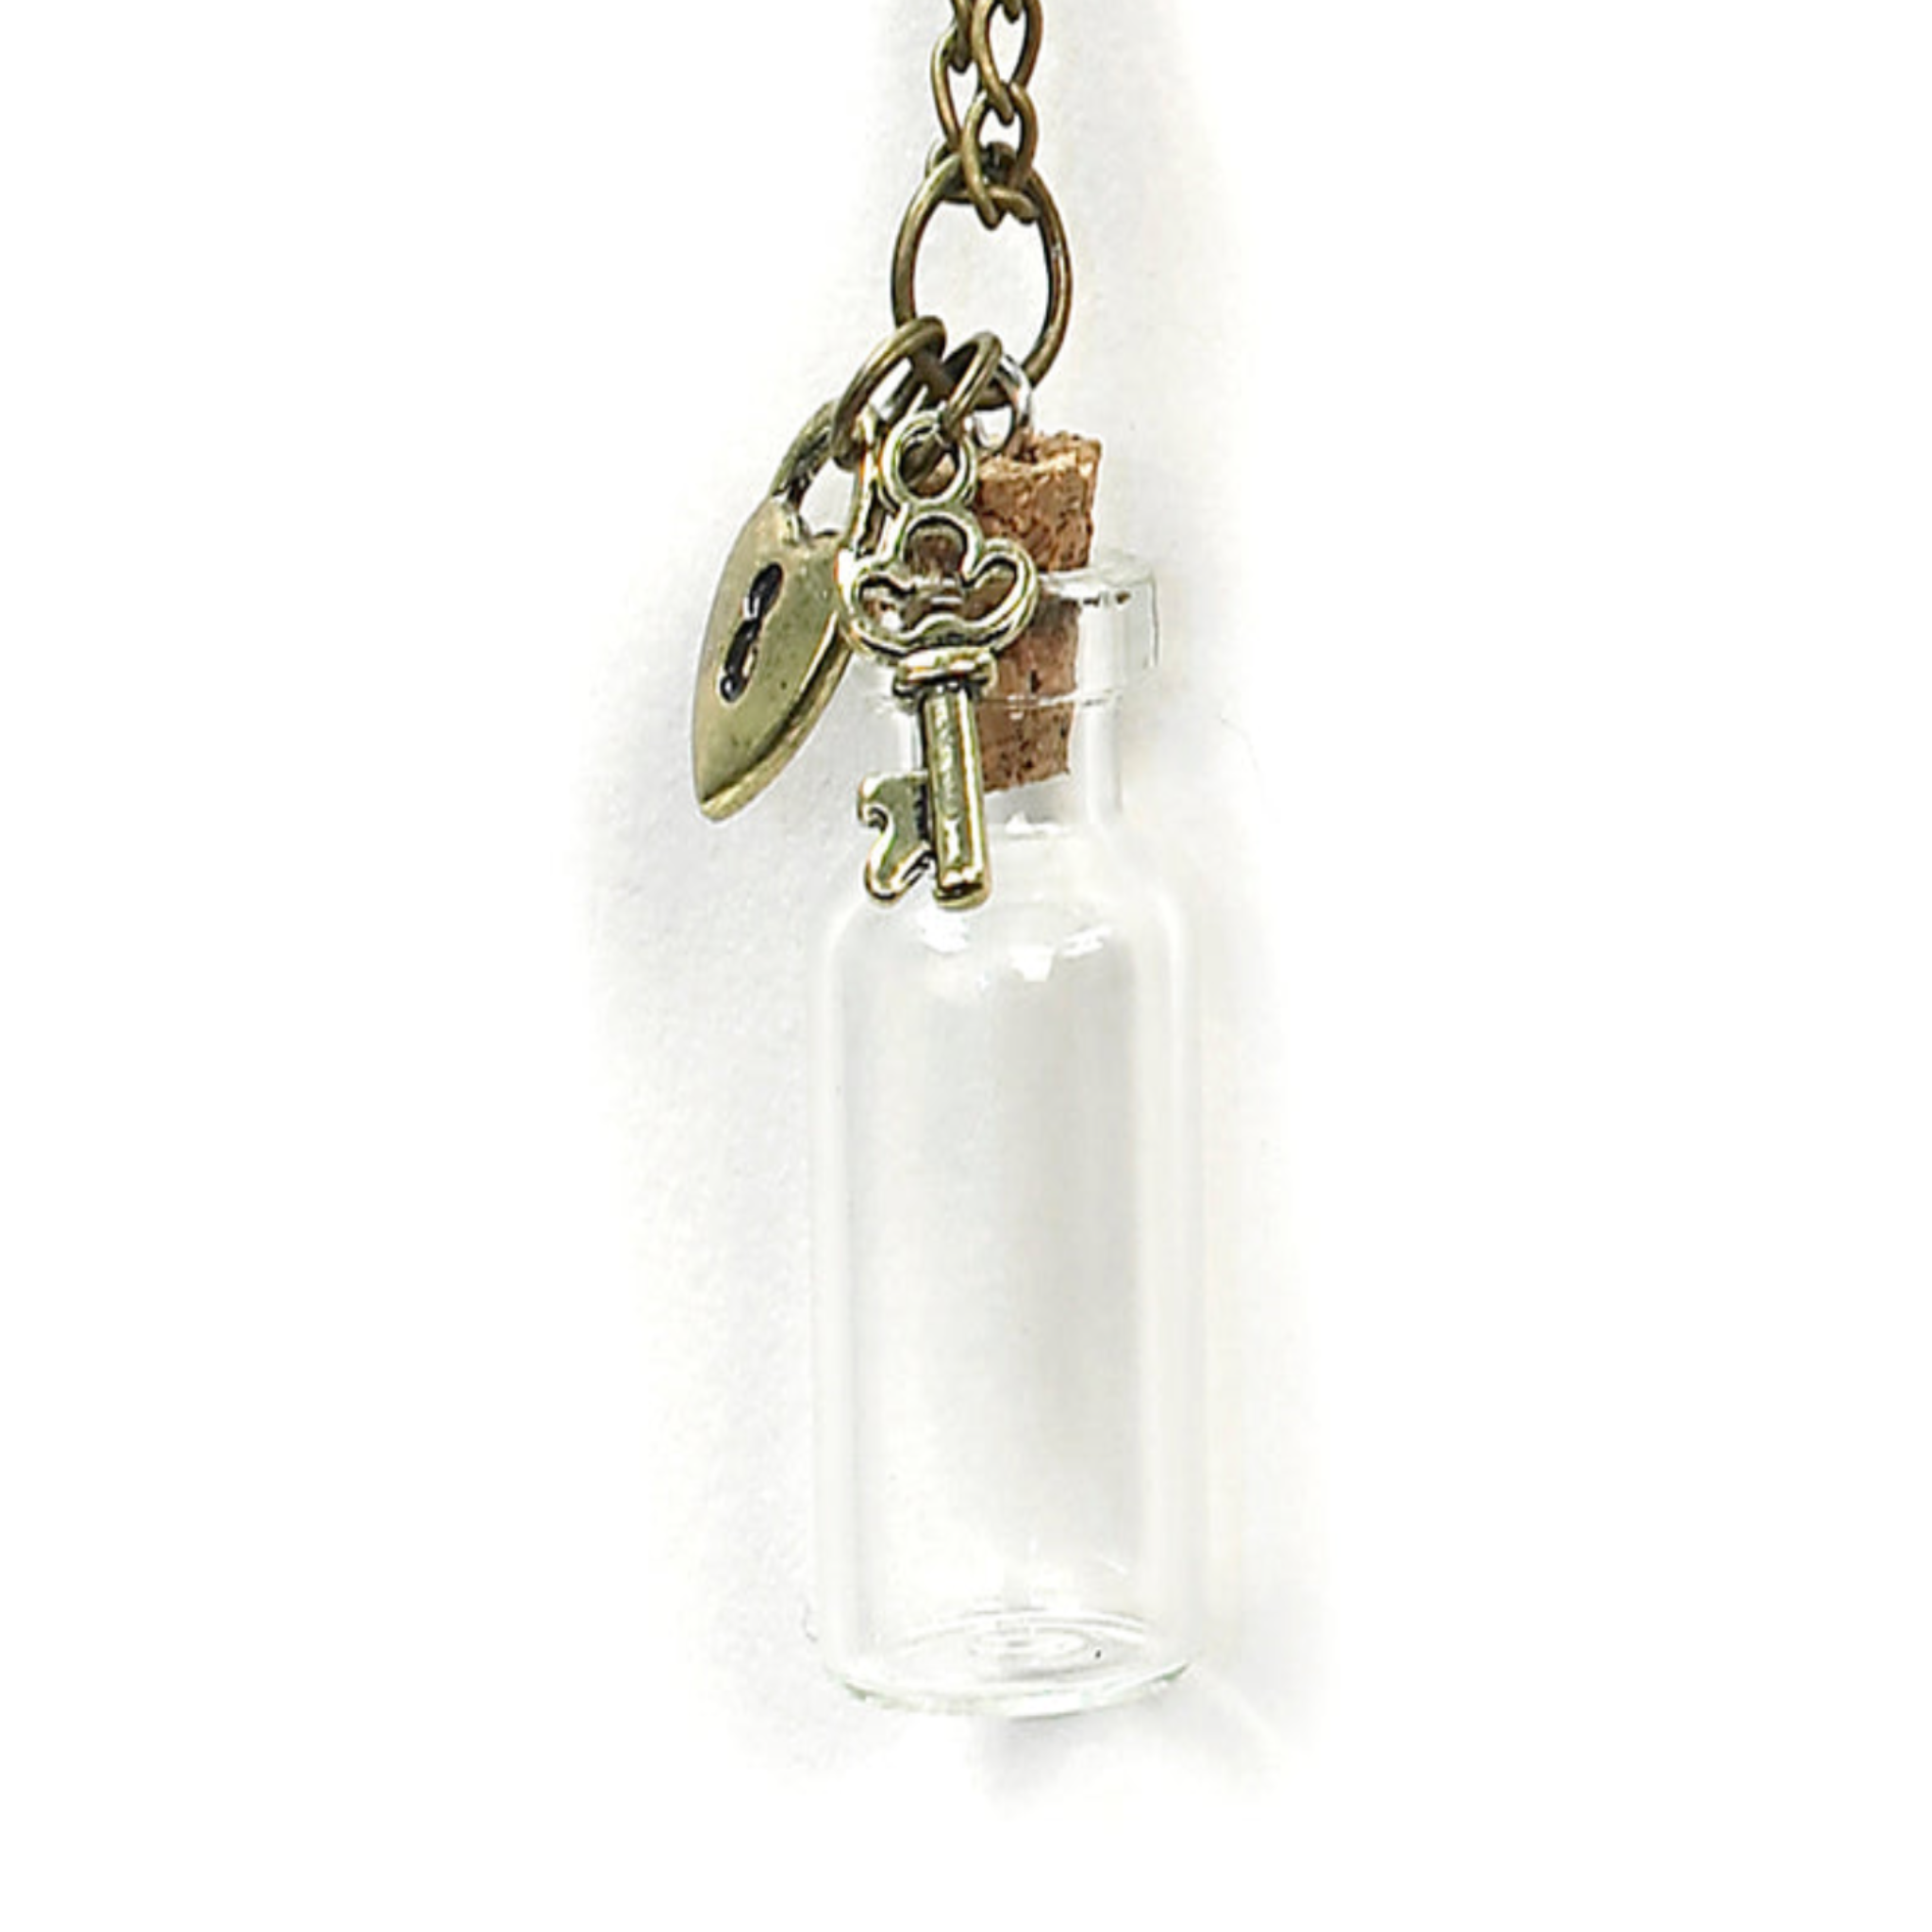 MONARCH MESSAGE IN A BOTTLE NECKLACE